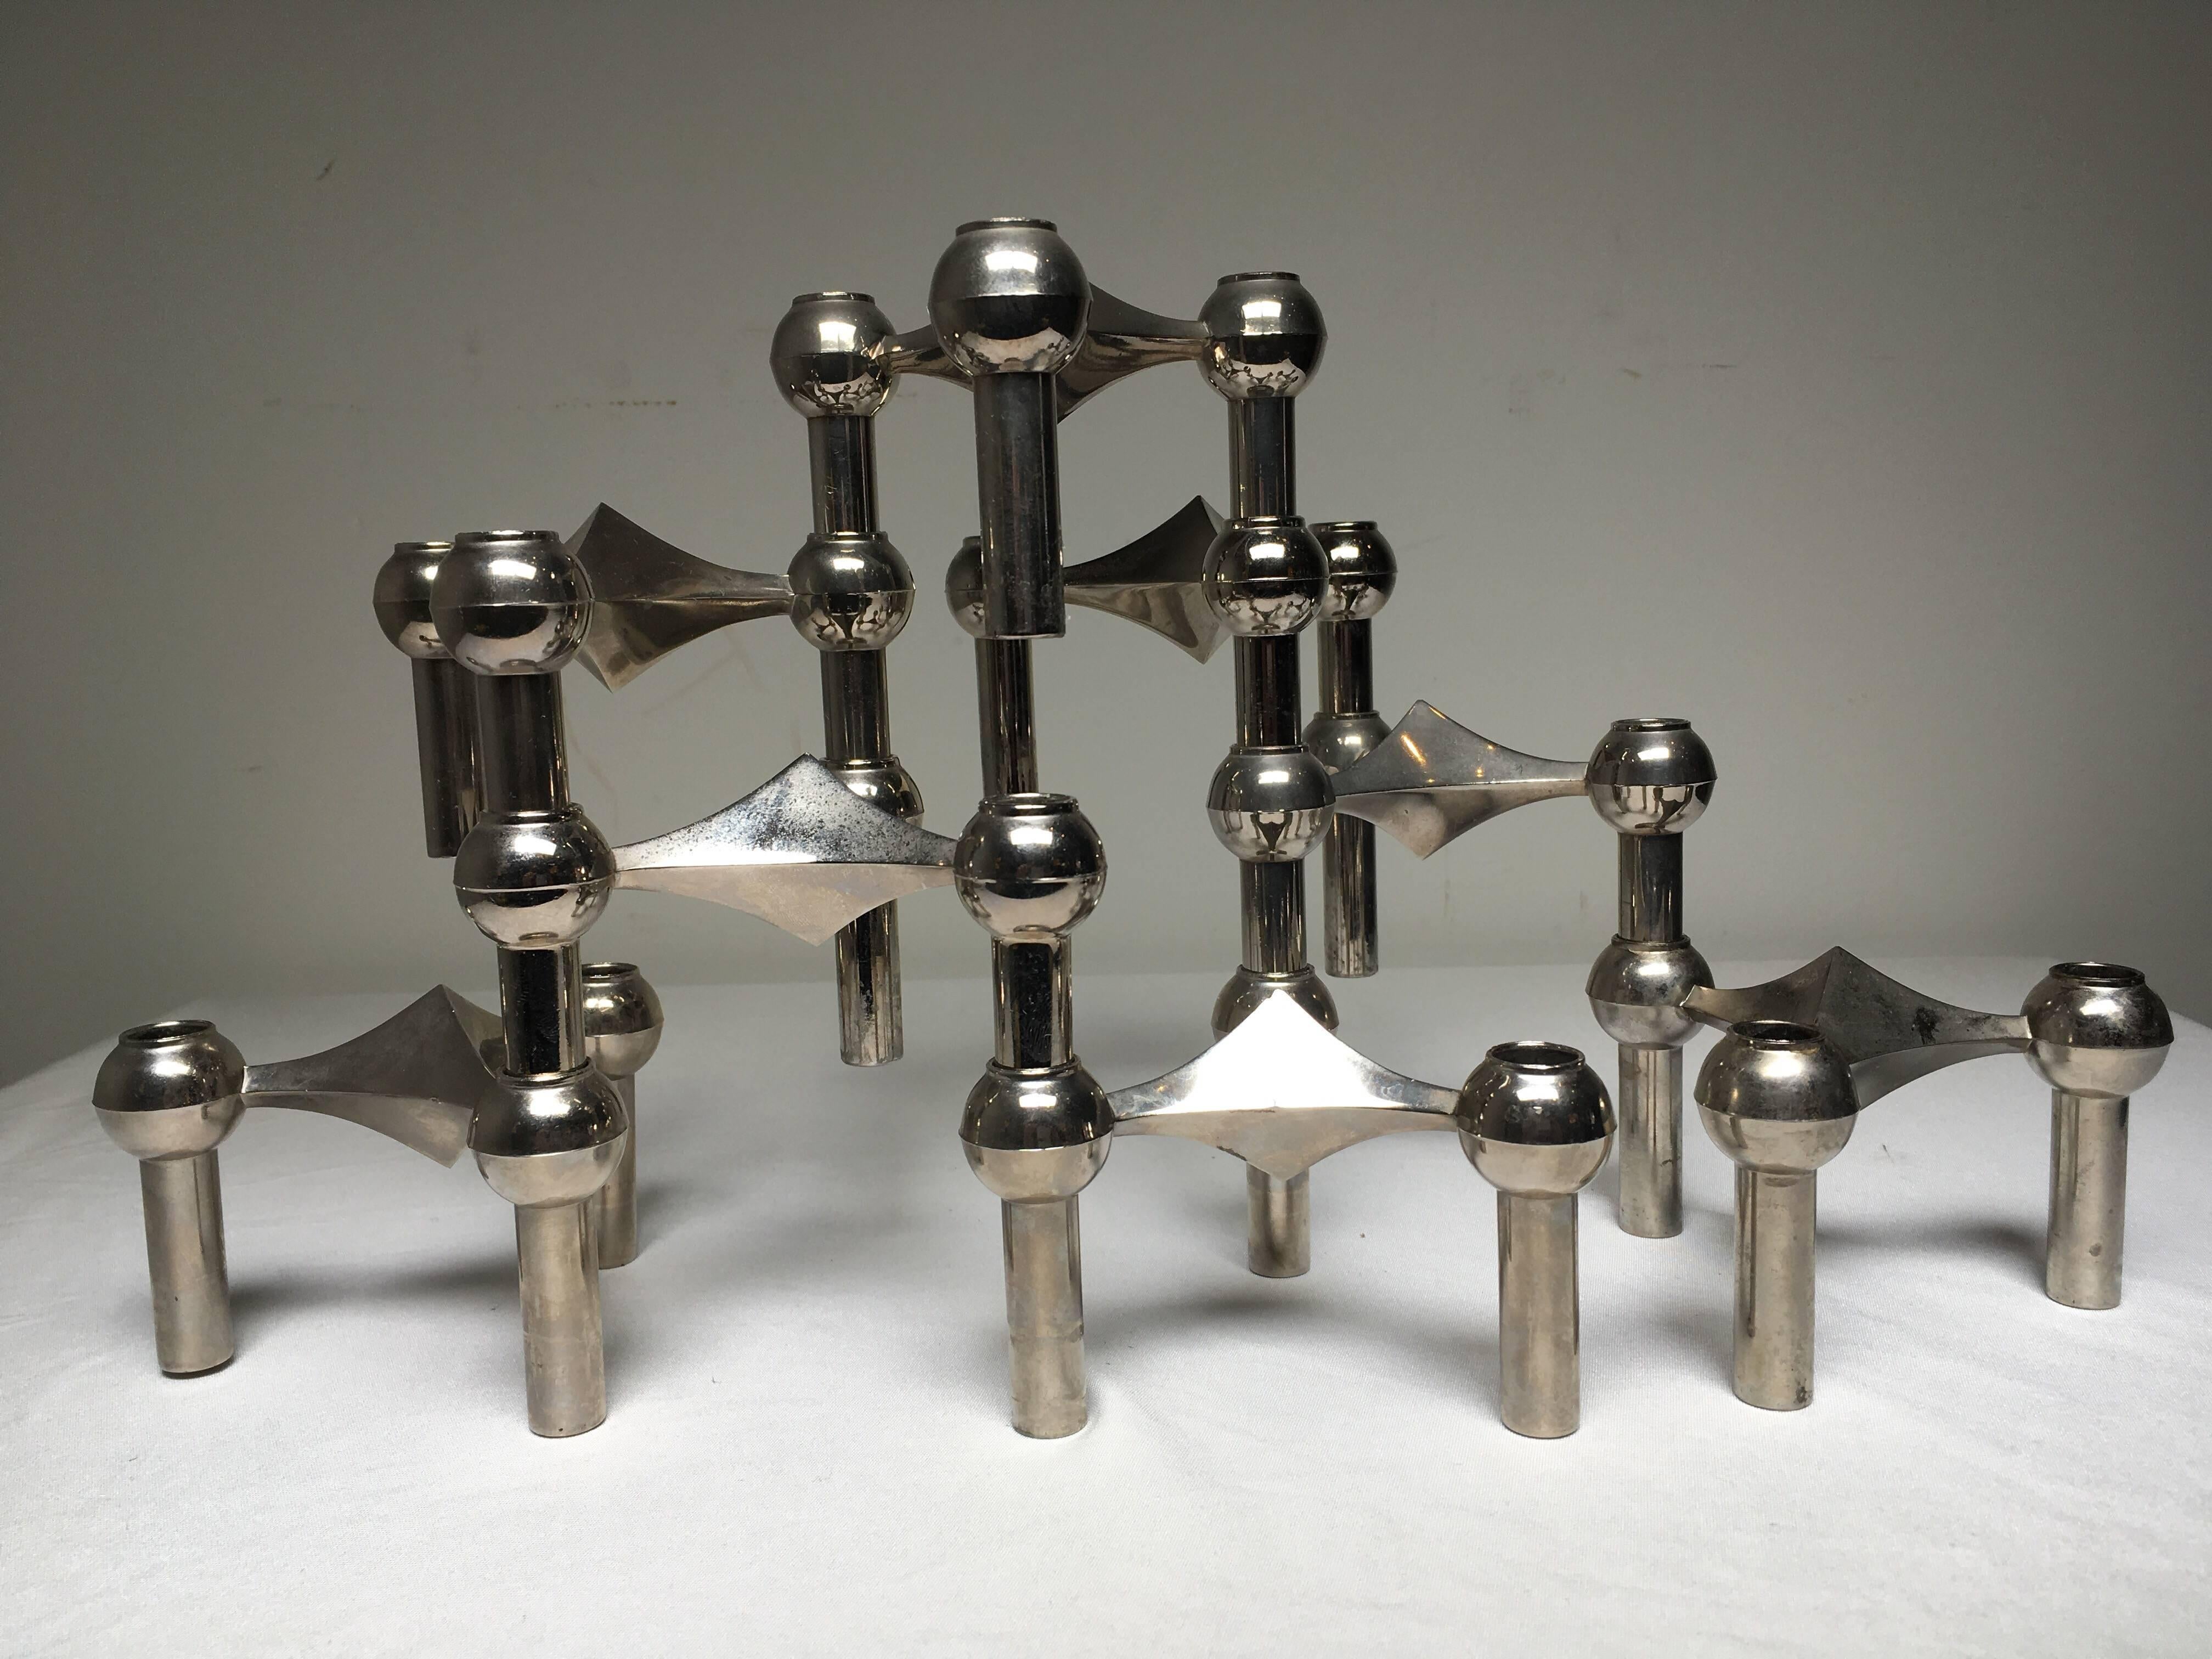 A molecular/atomic looking sculpture made of eight individual candleholders. The system is designed by Caesar Stoffi and Fritz Nagel for BMF in Germany during the 1960s. This modular design can be configured in an endless number of ways both